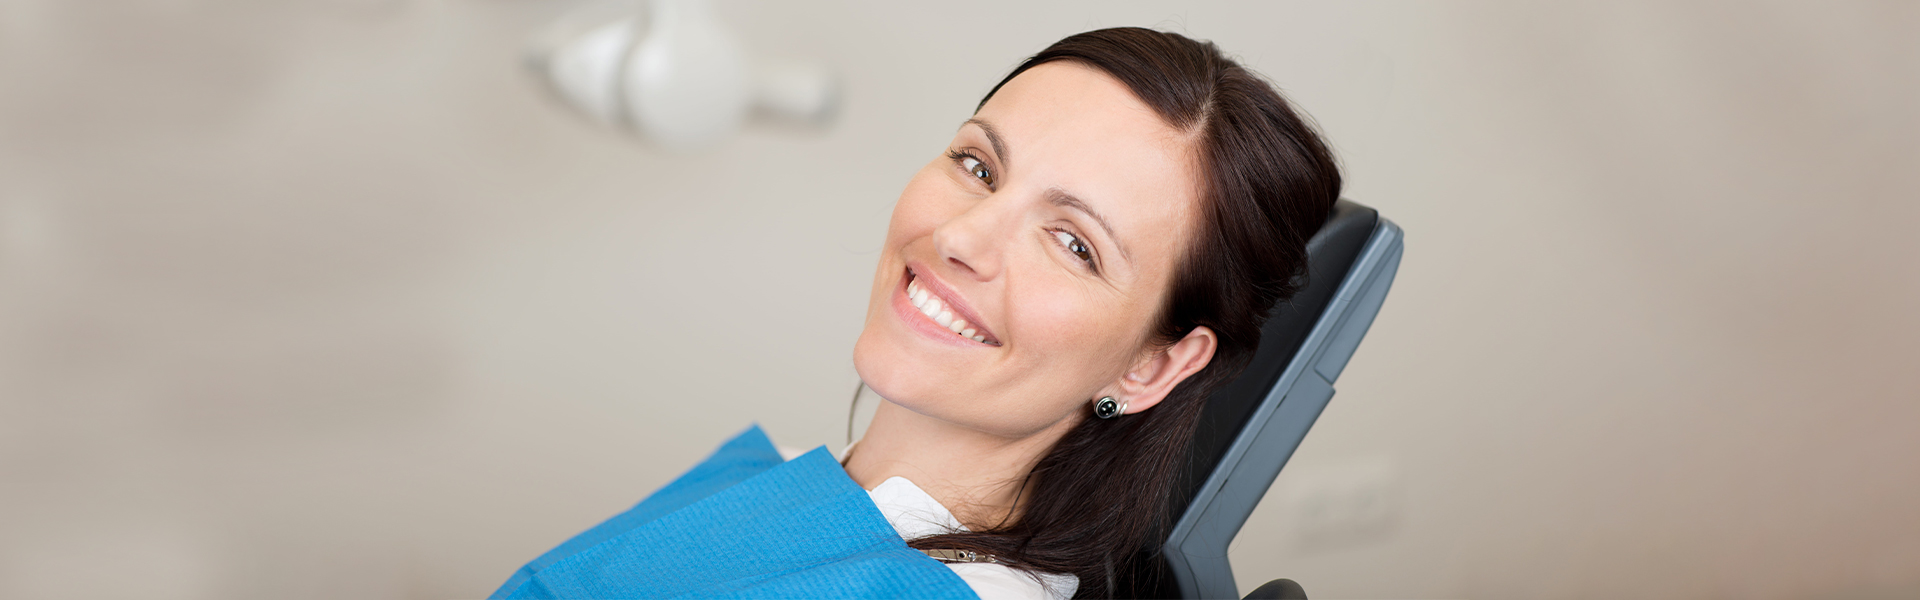 What Are the Benefits of Dental Visits?